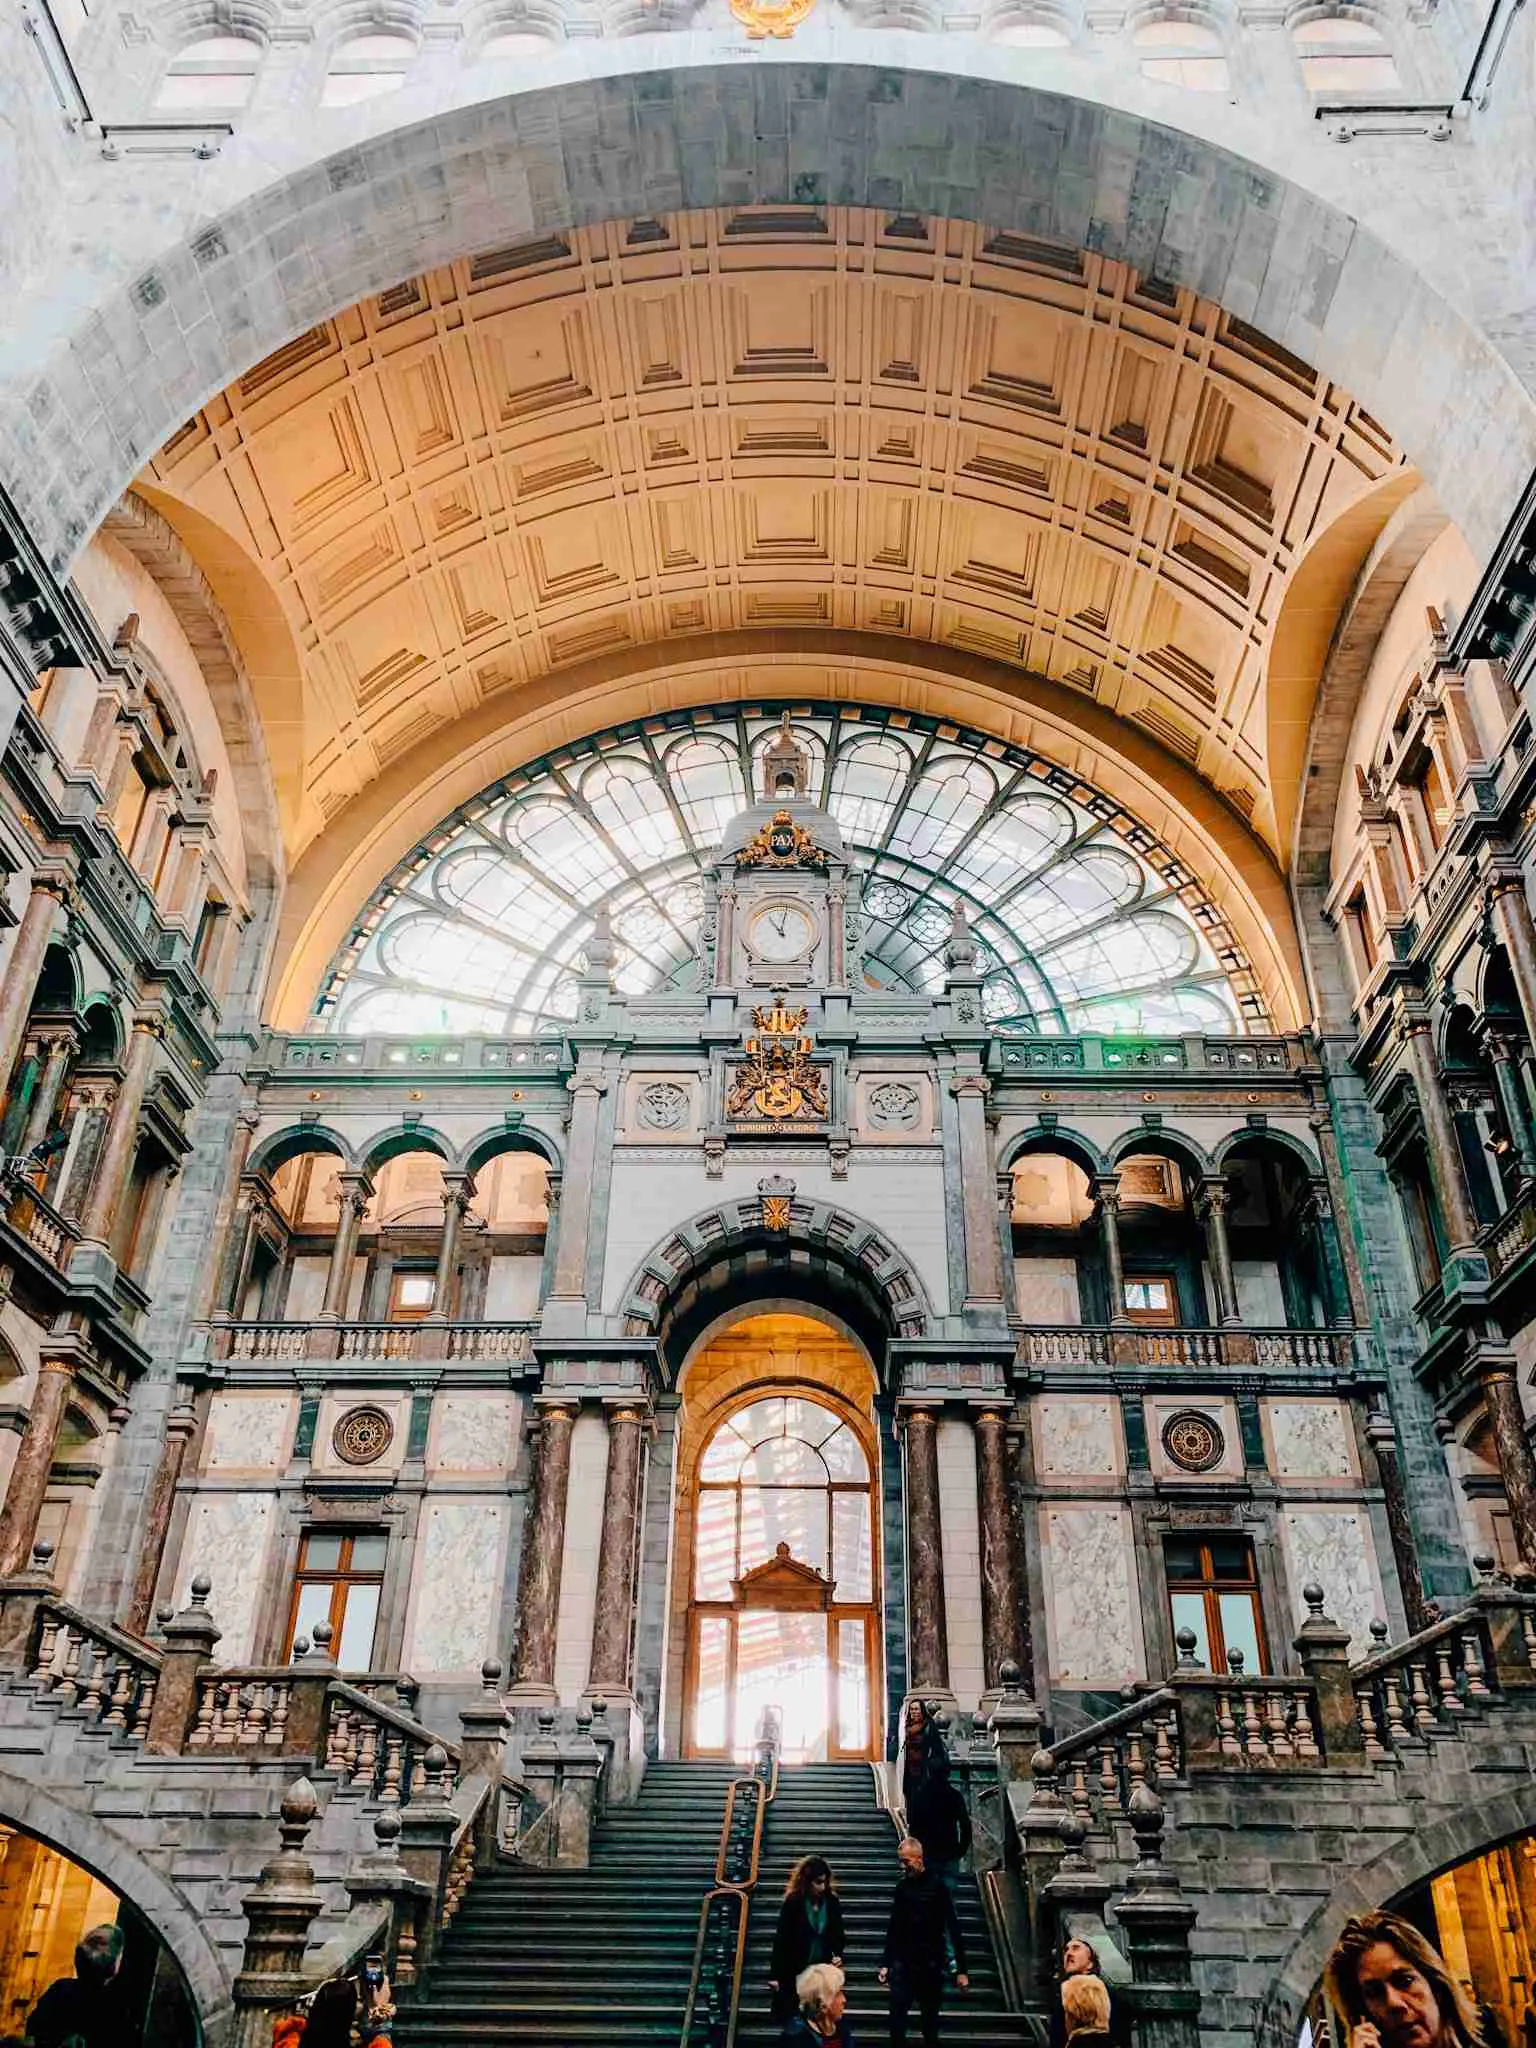 Inside the beautiful train station in Antwerp - one of the most underrated day trips to Belgium from Lille